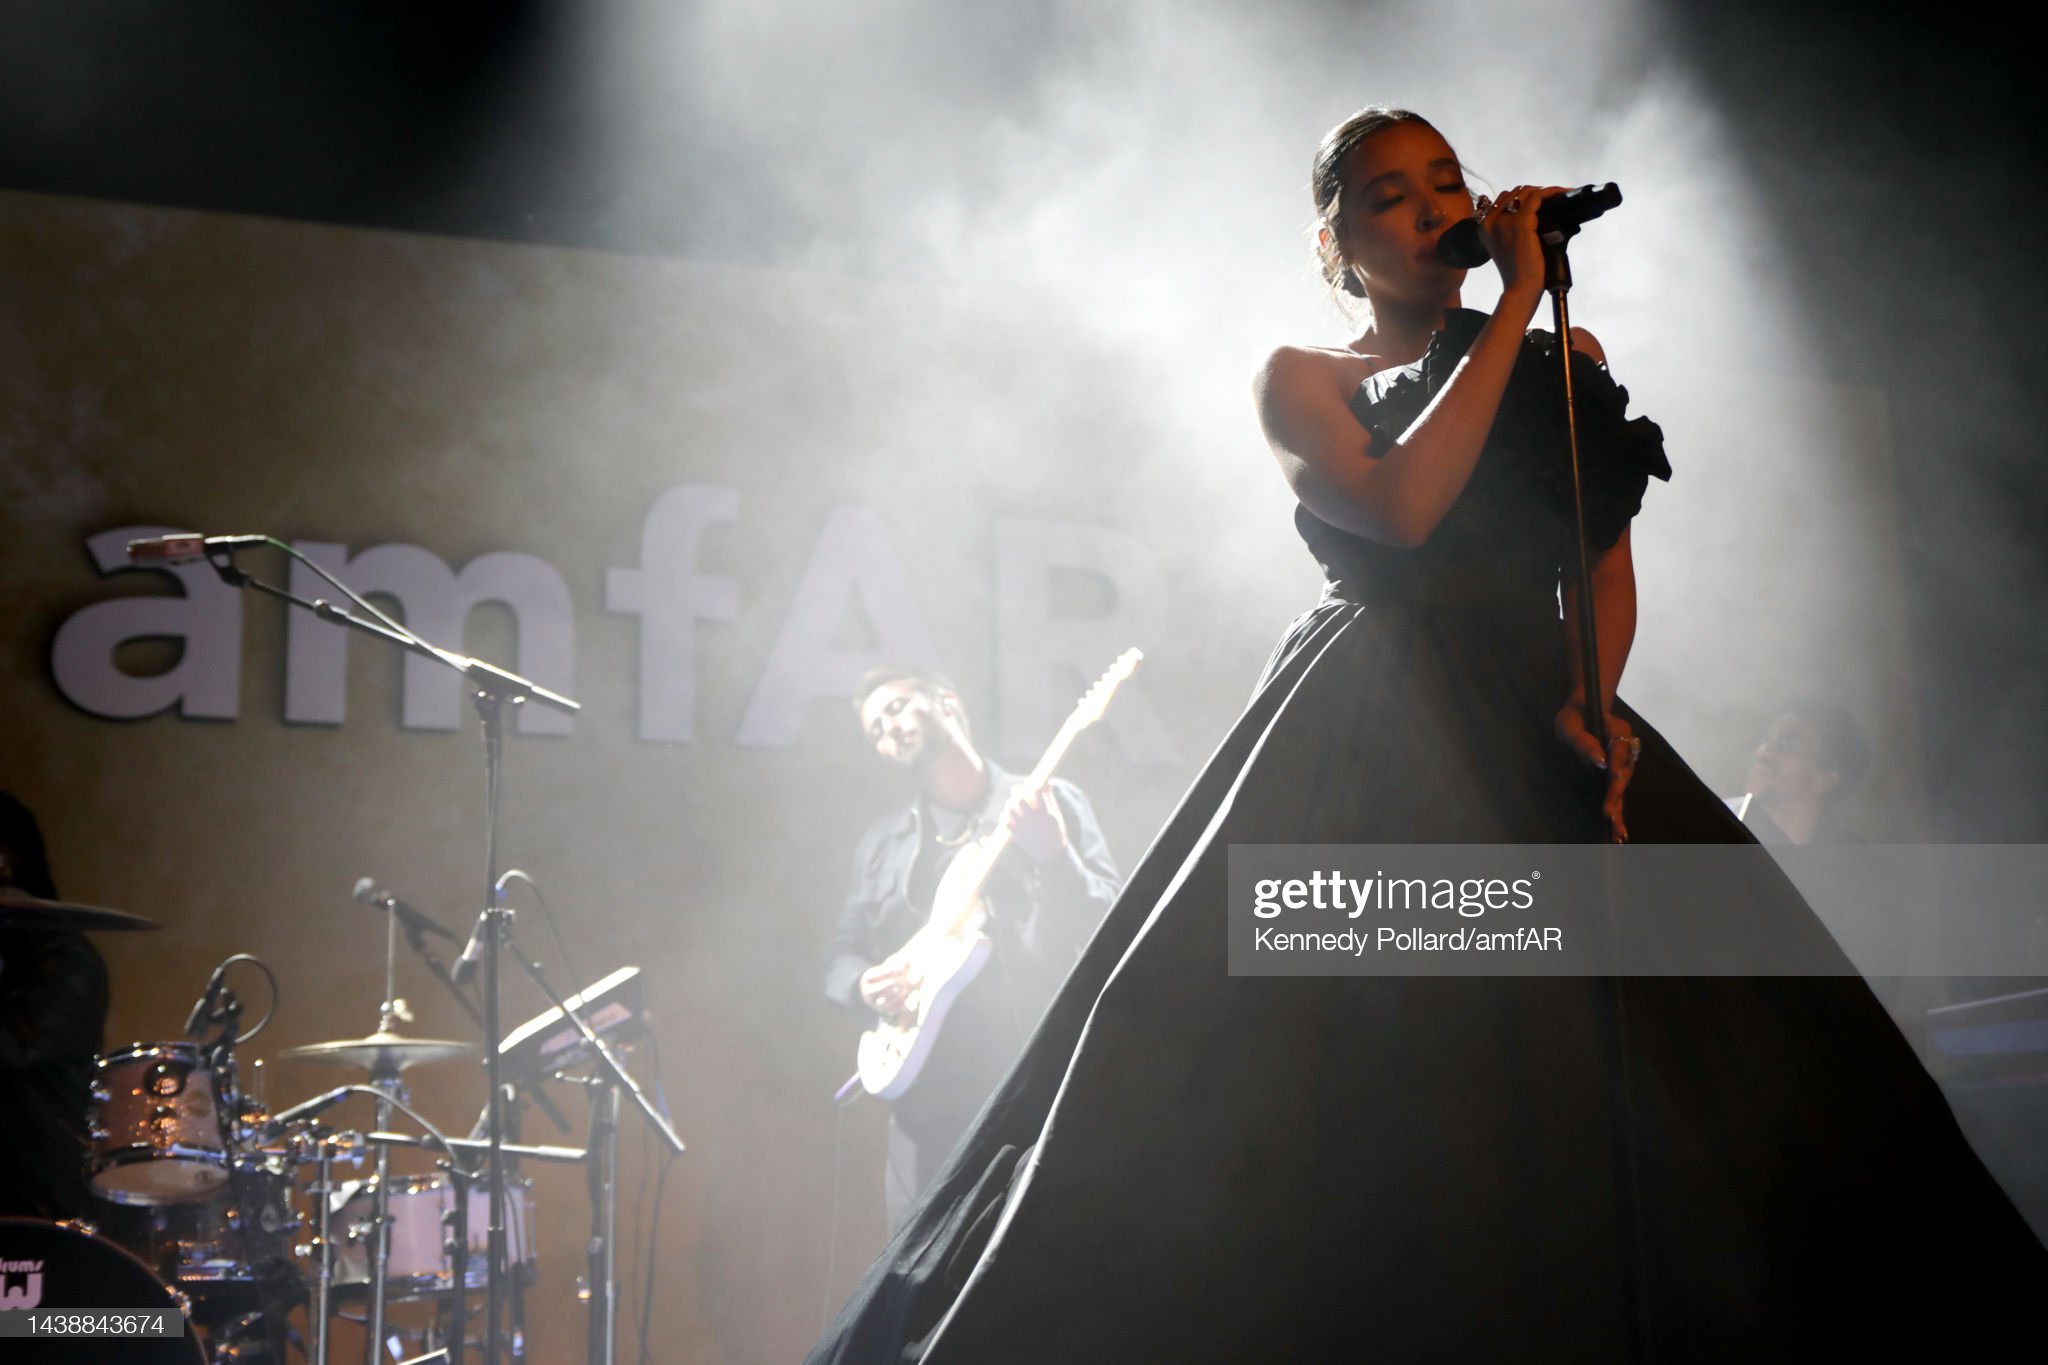 gettyimages-1438843674-2048x2048.jpeg